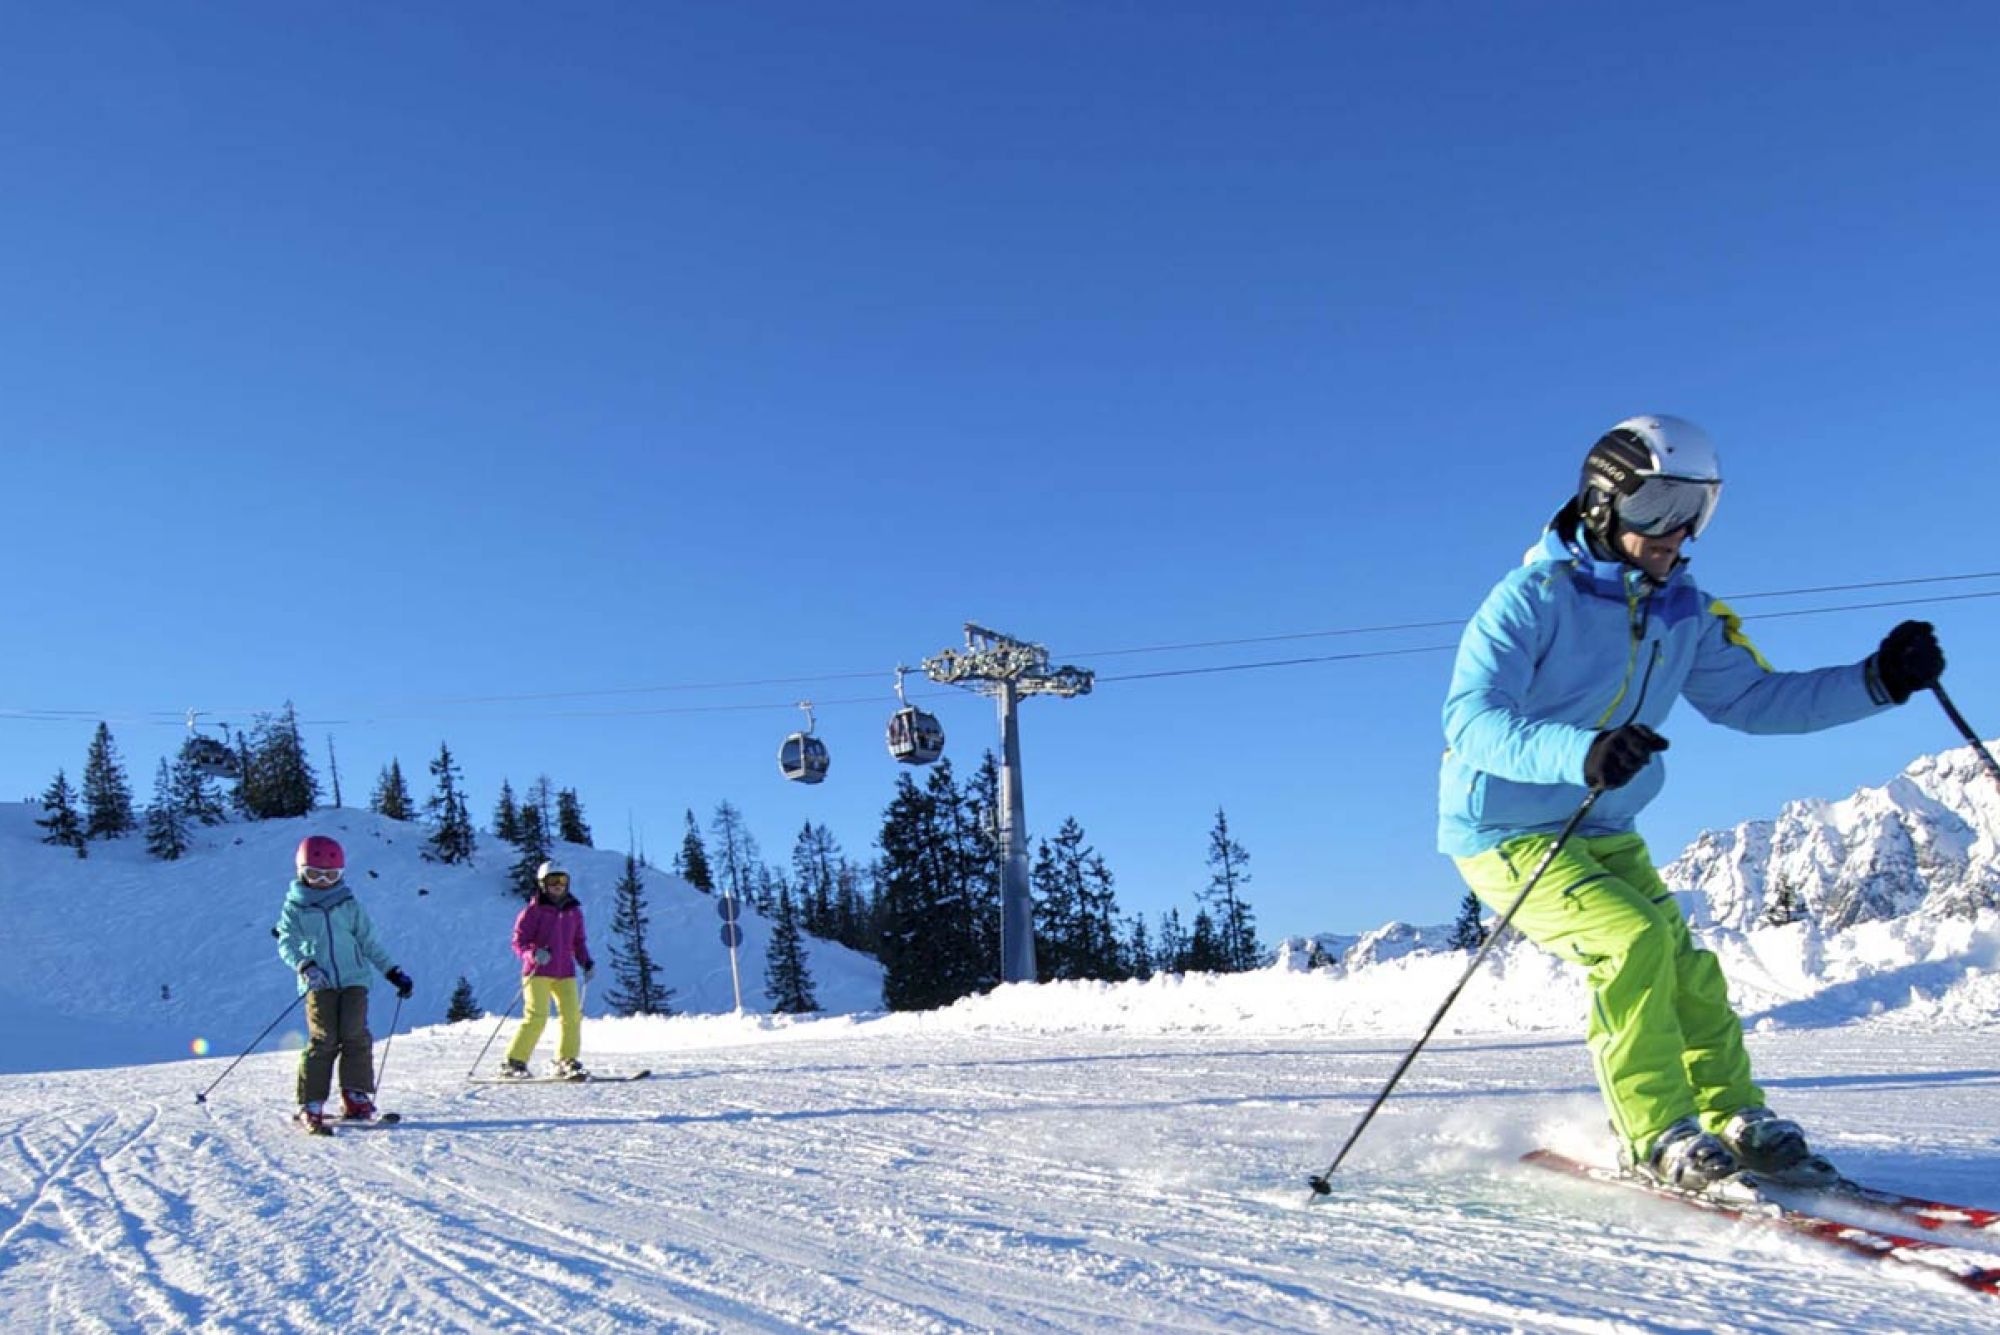 Winter sports and activities in the Alps